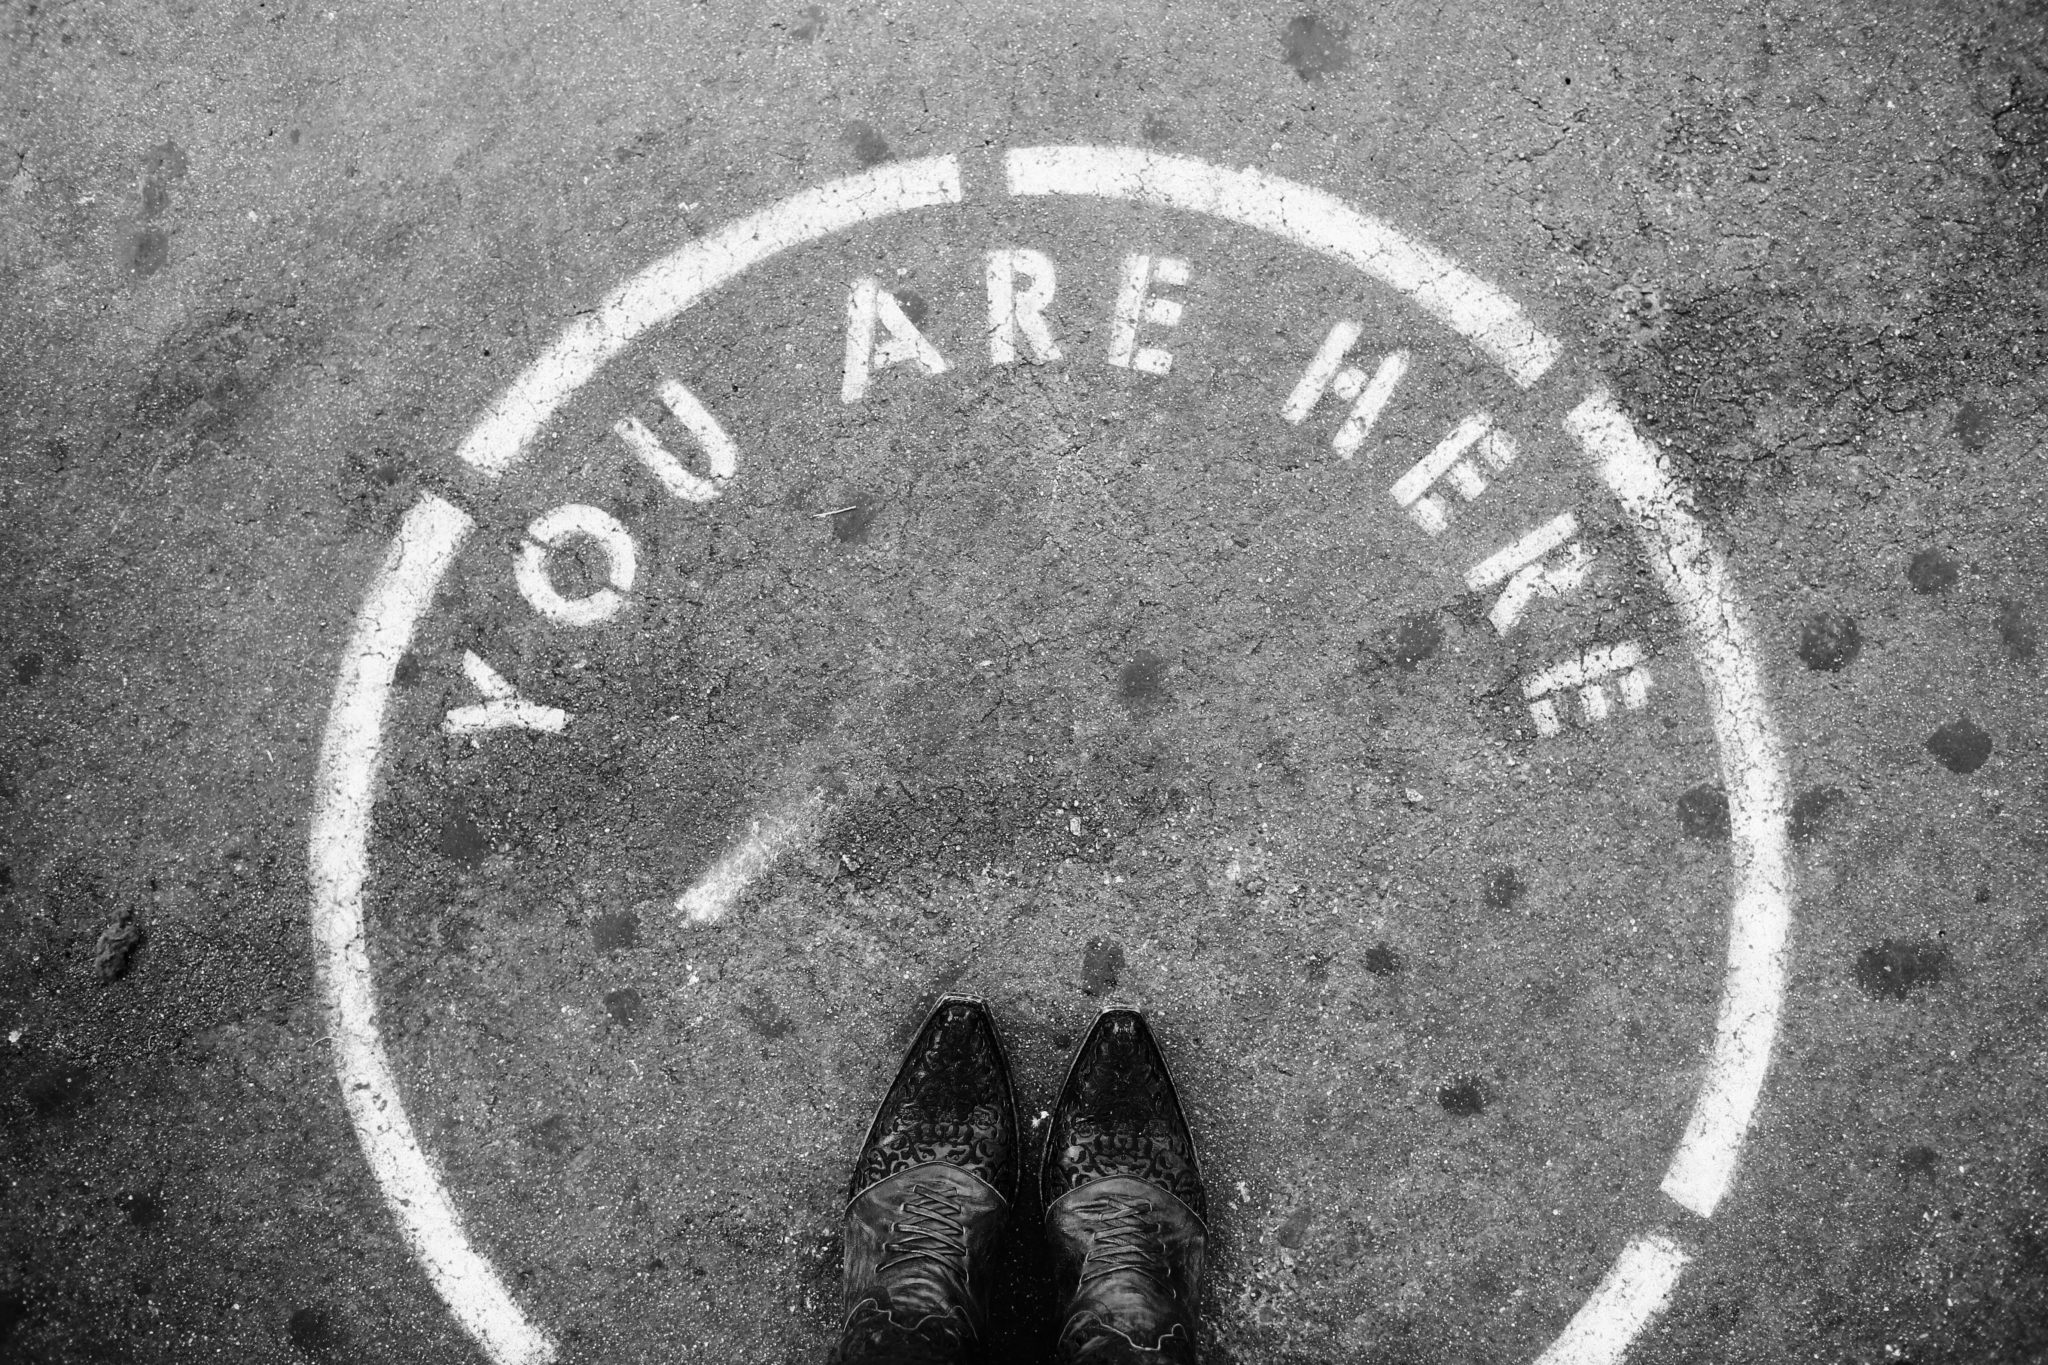 You are here on sidewalk